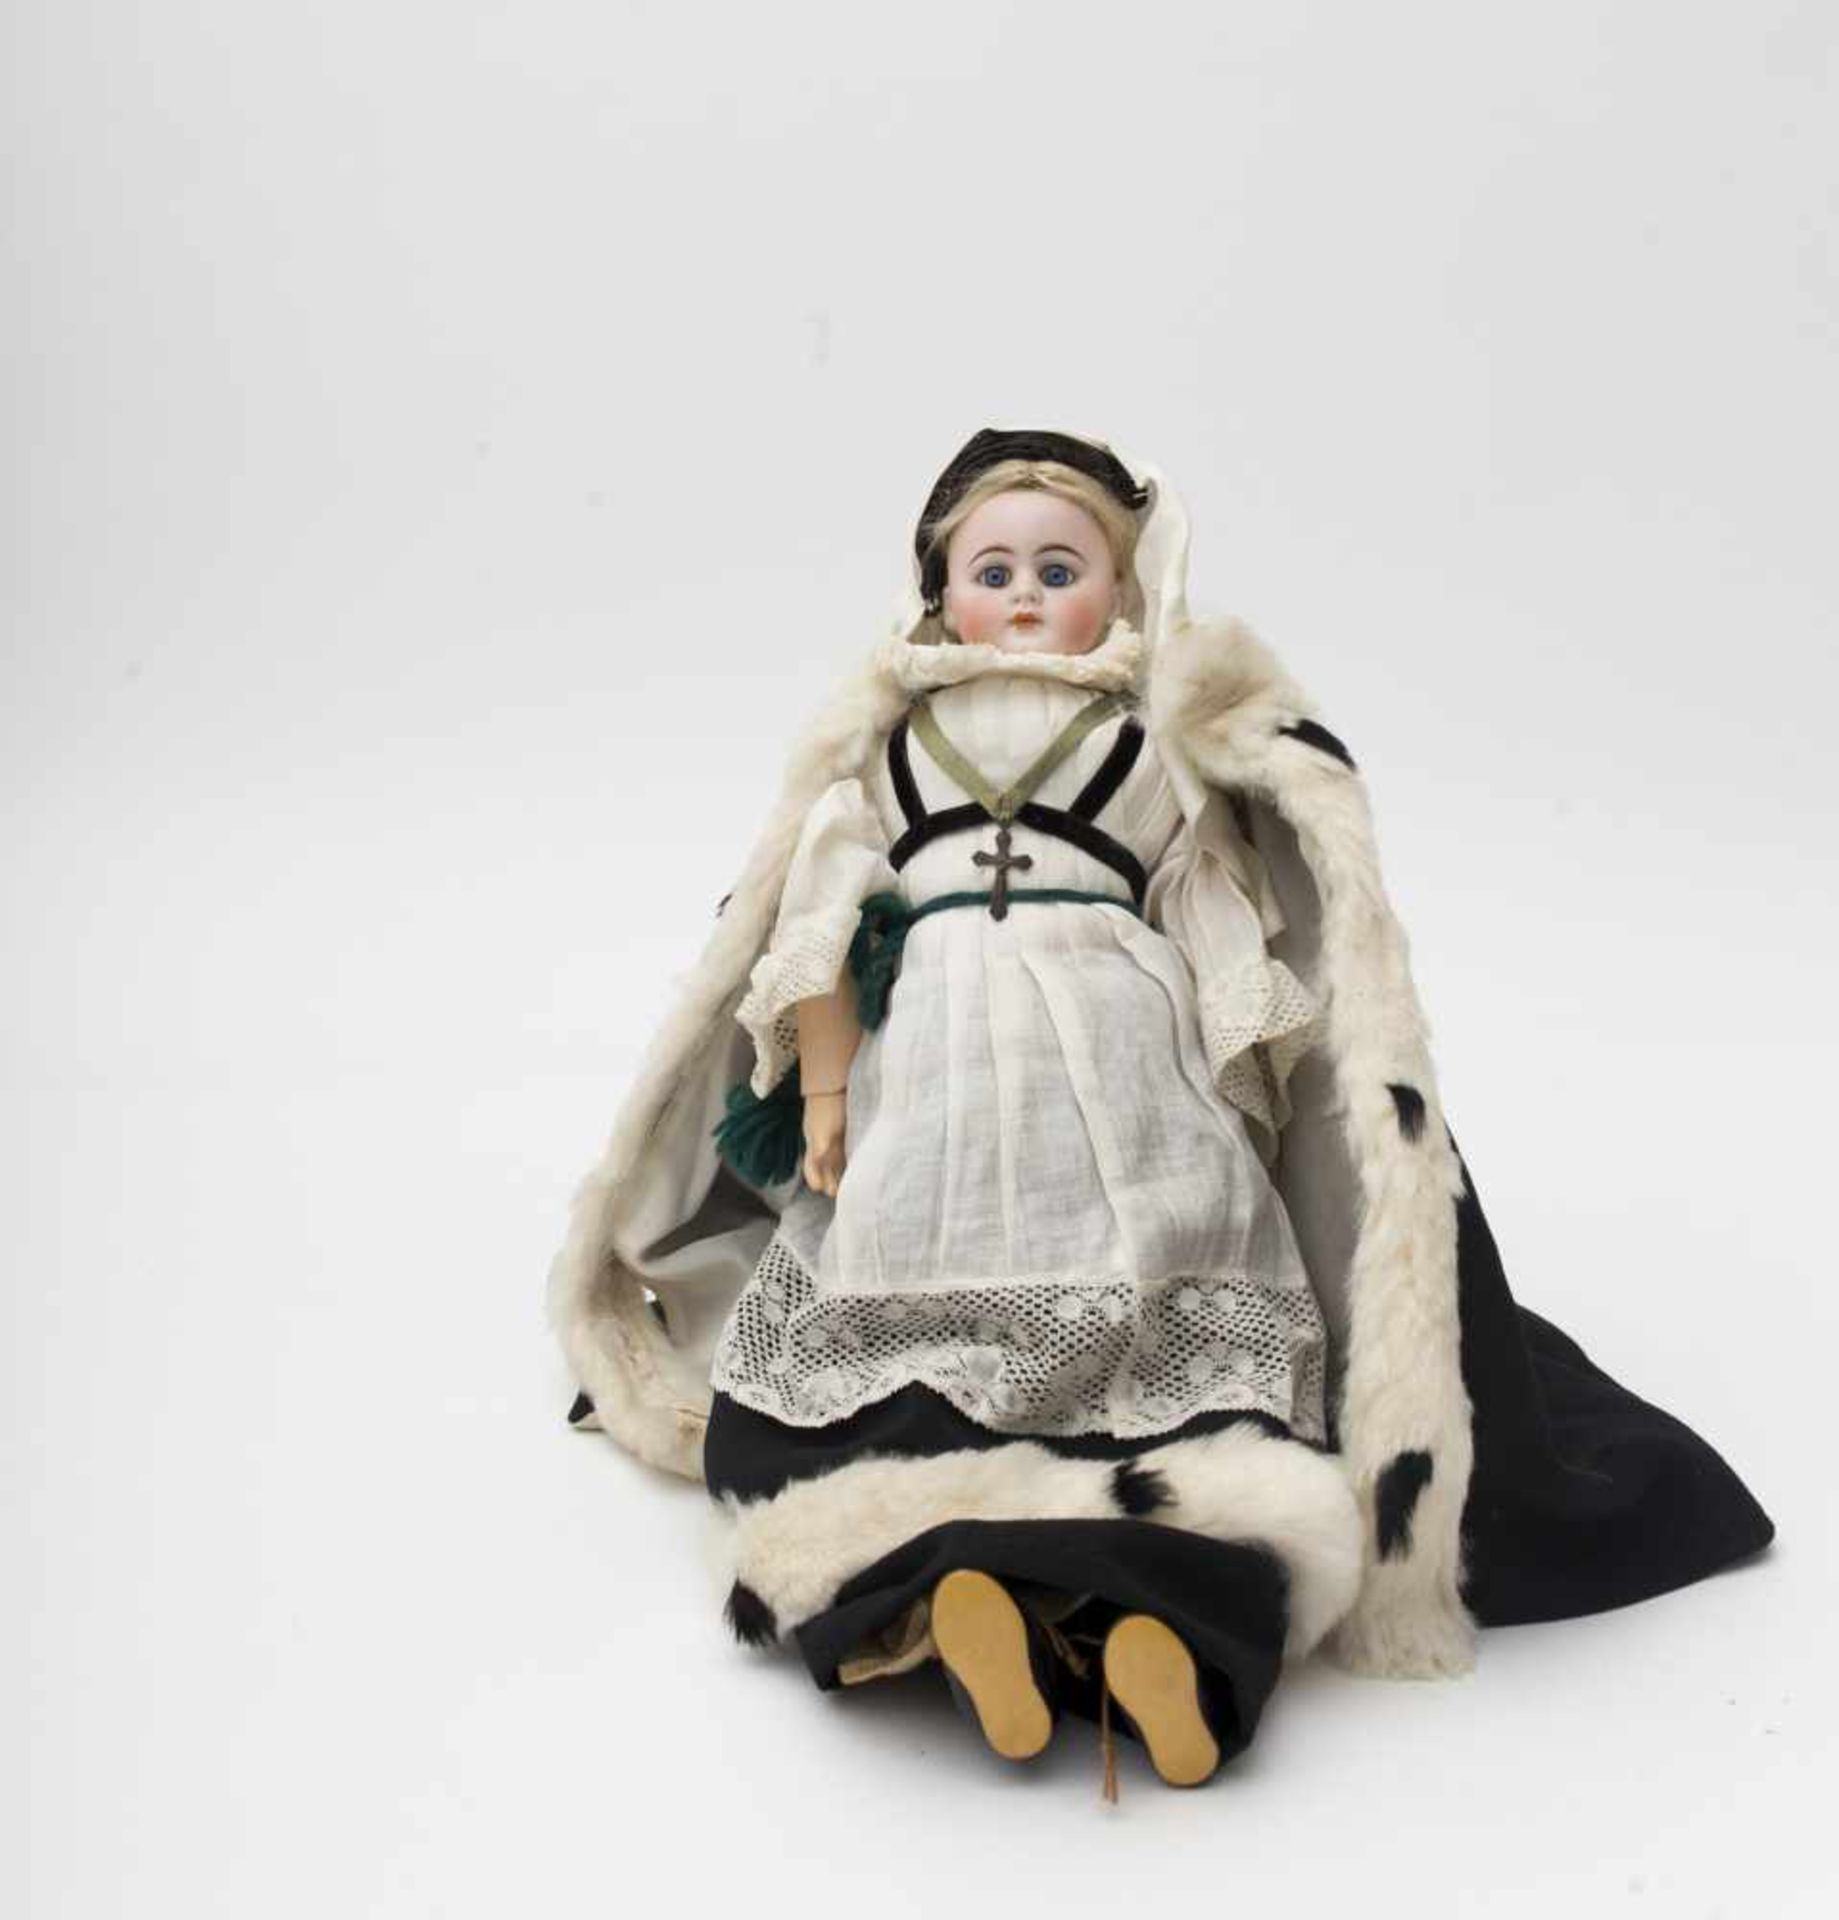 Doll With biscuit head and torso, closed mouth, fixed blue eyes, original articulated kidskin and